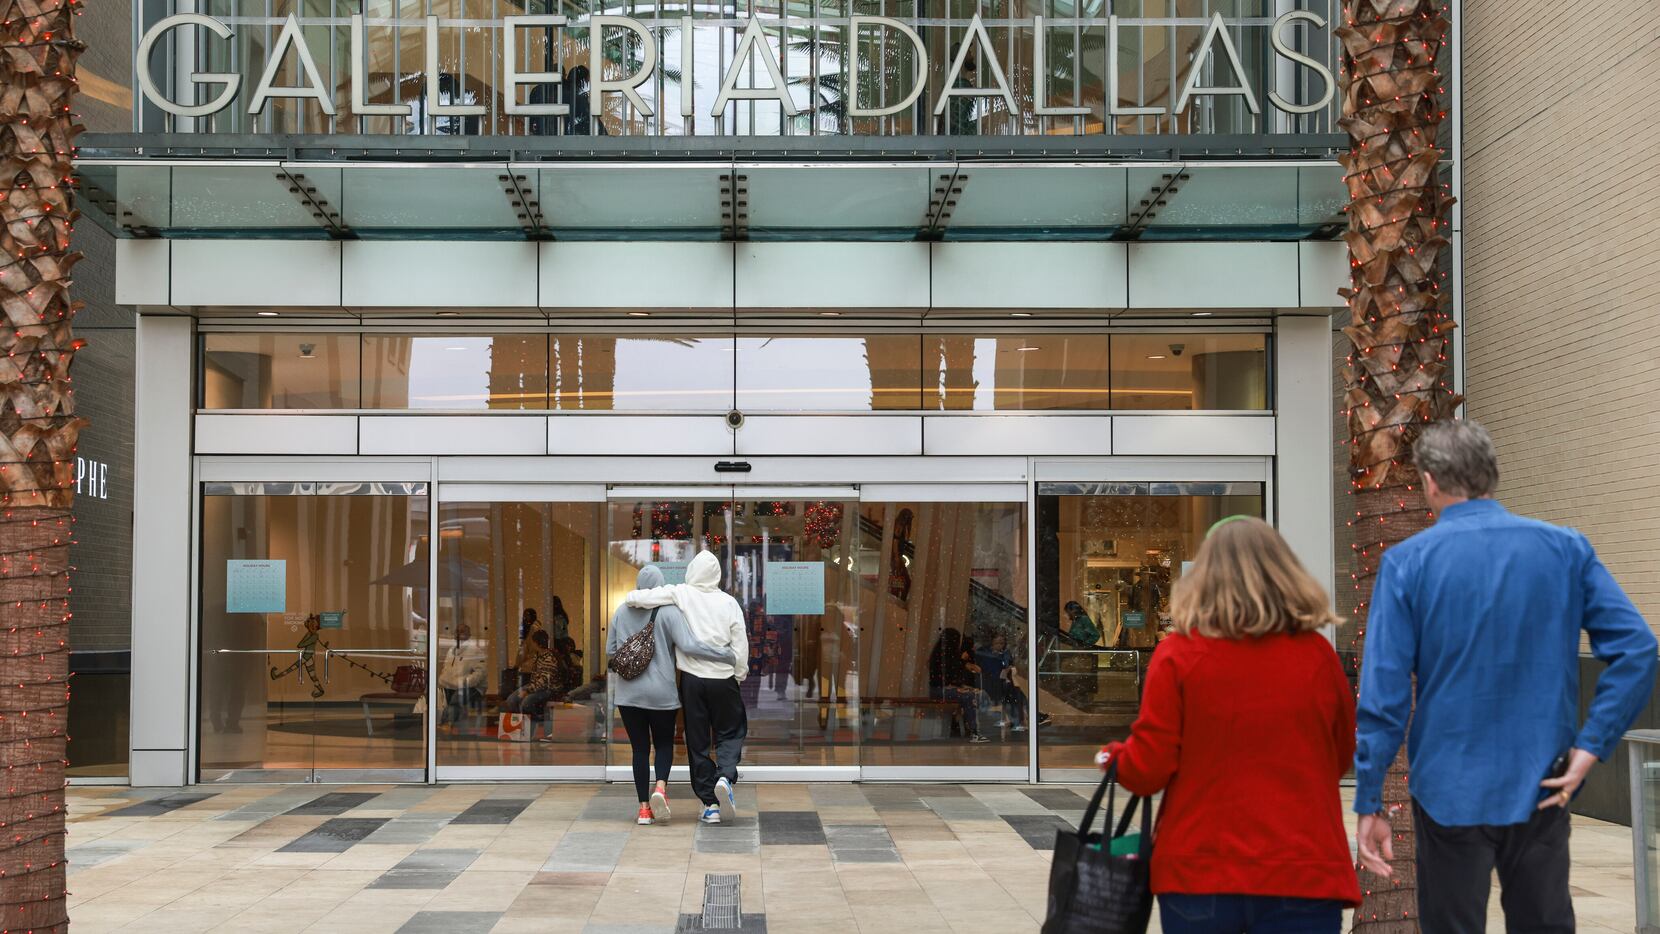 Galleria Dallas to Welcome Six New Stores Coming Soon - Addison Guide